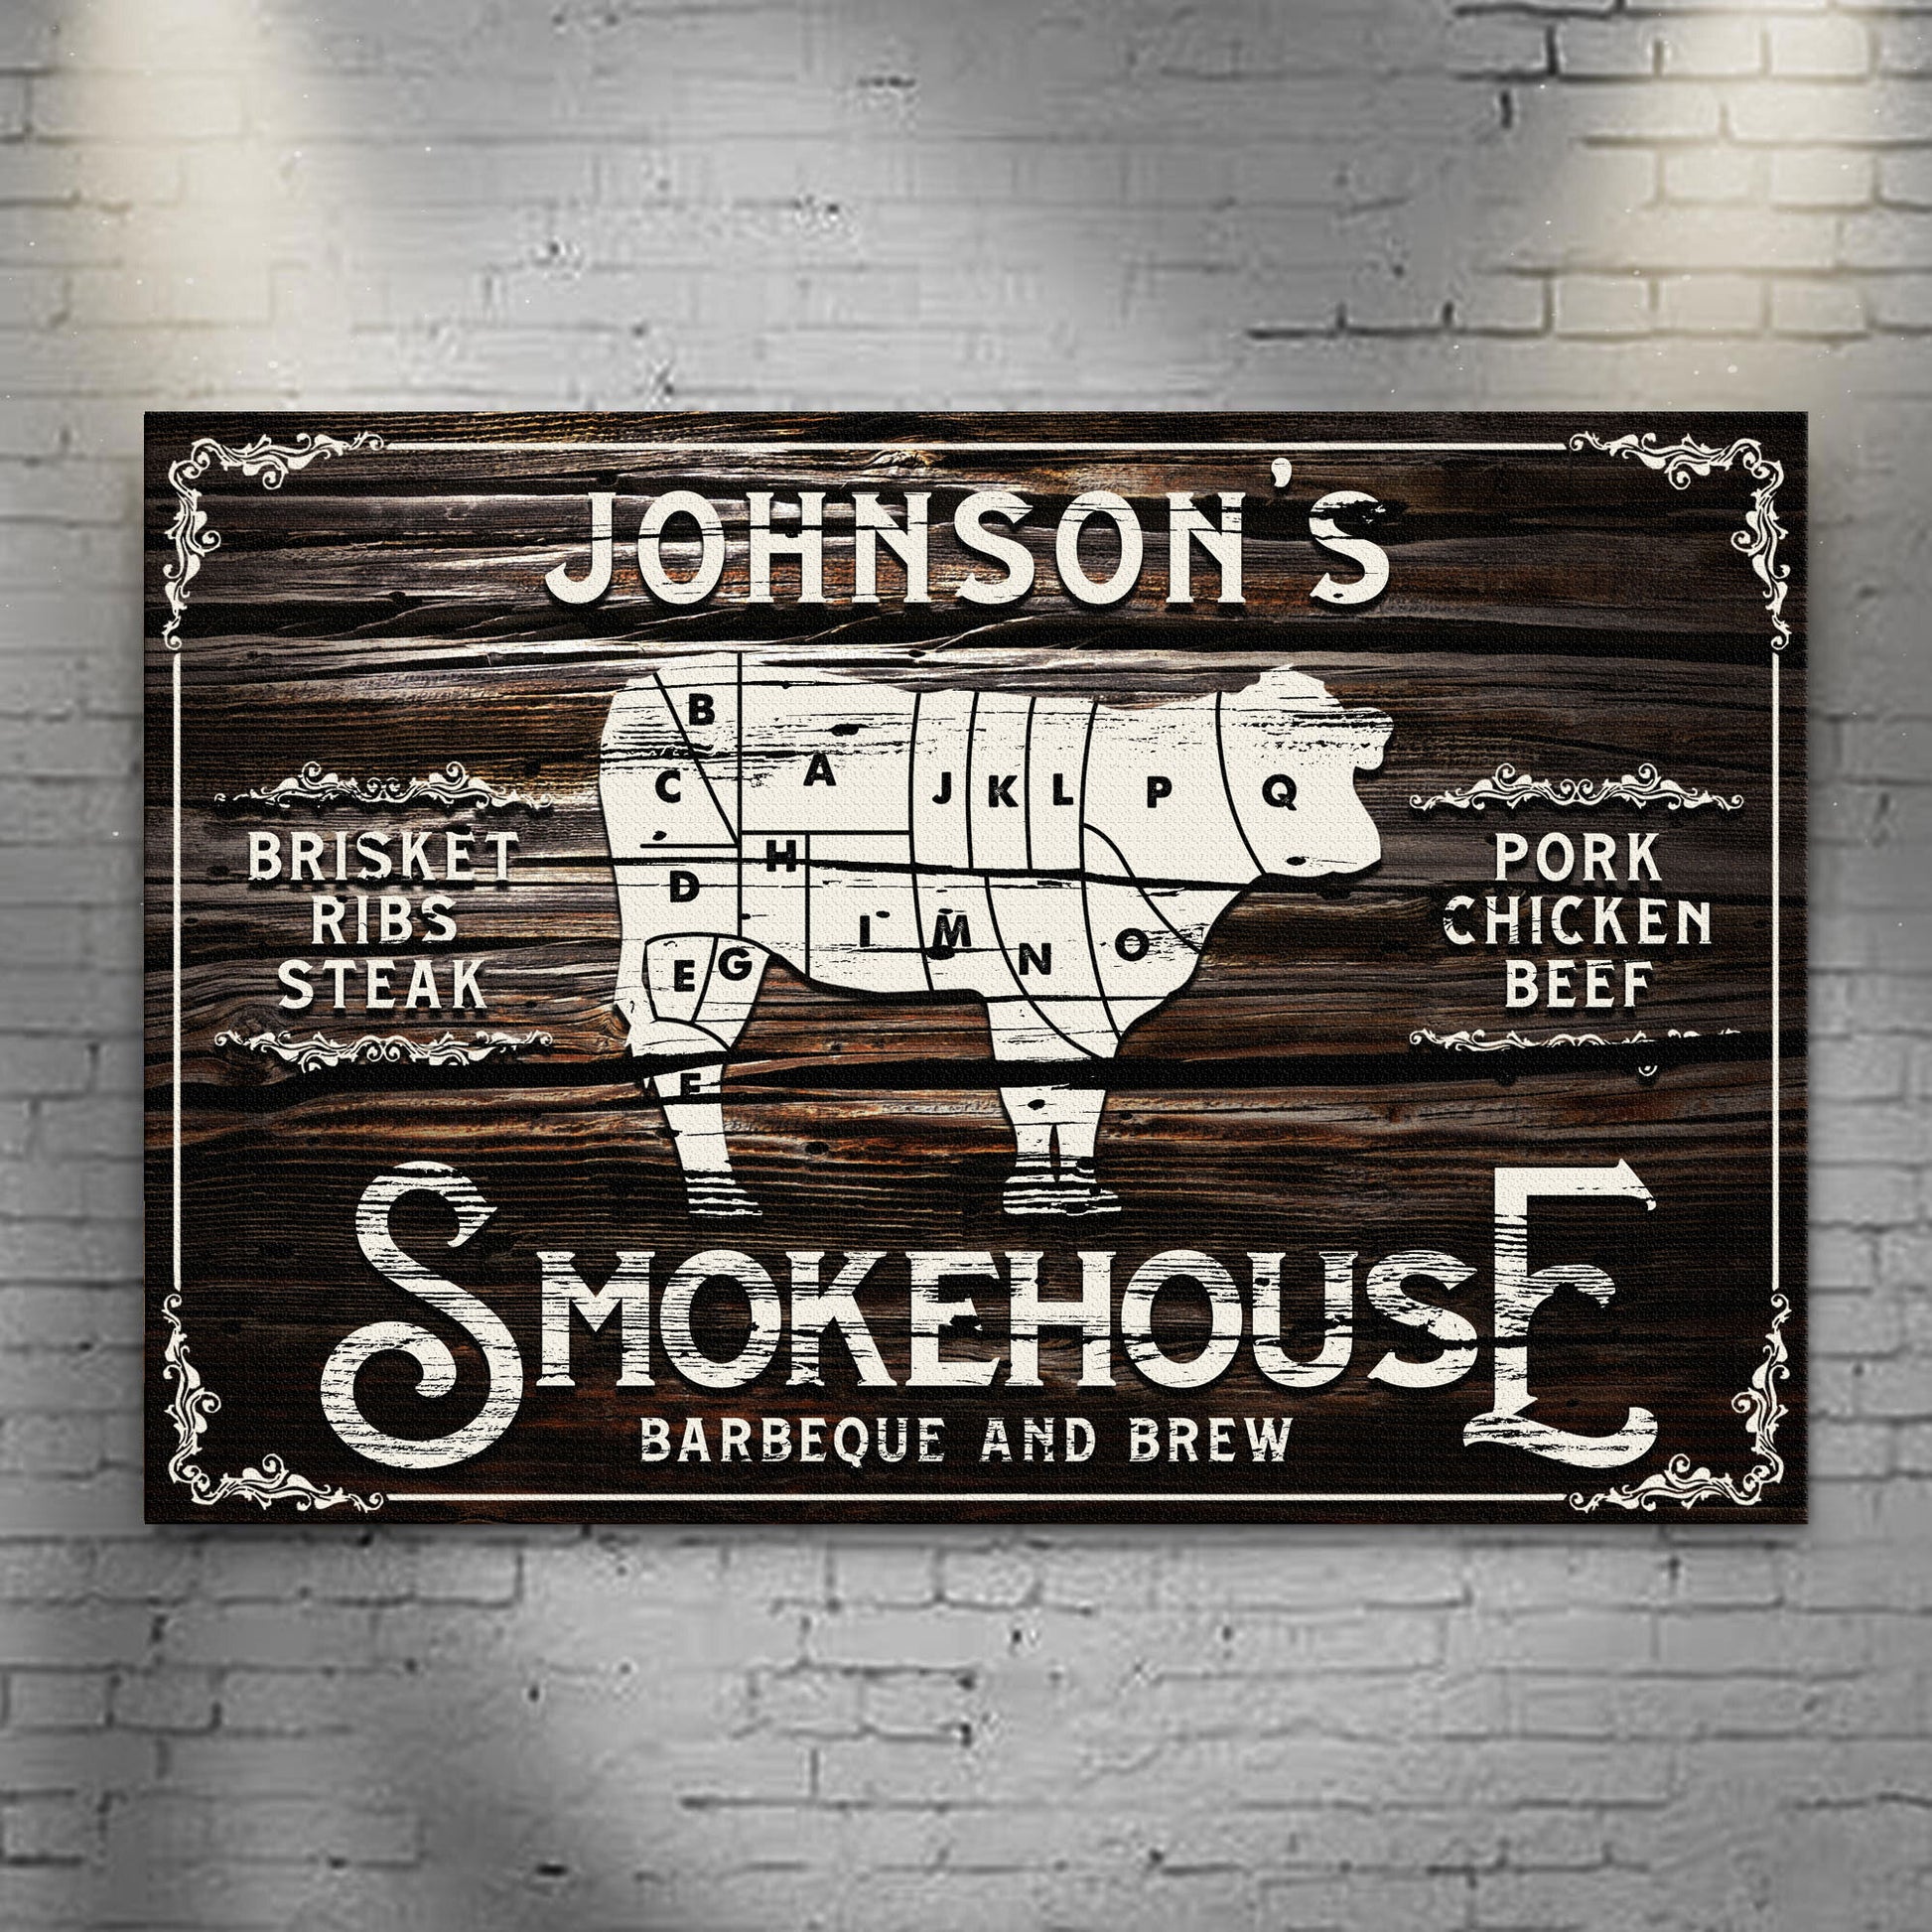 Smokehouse Barbeque And Brew Sign - Image by Tailored Canvases